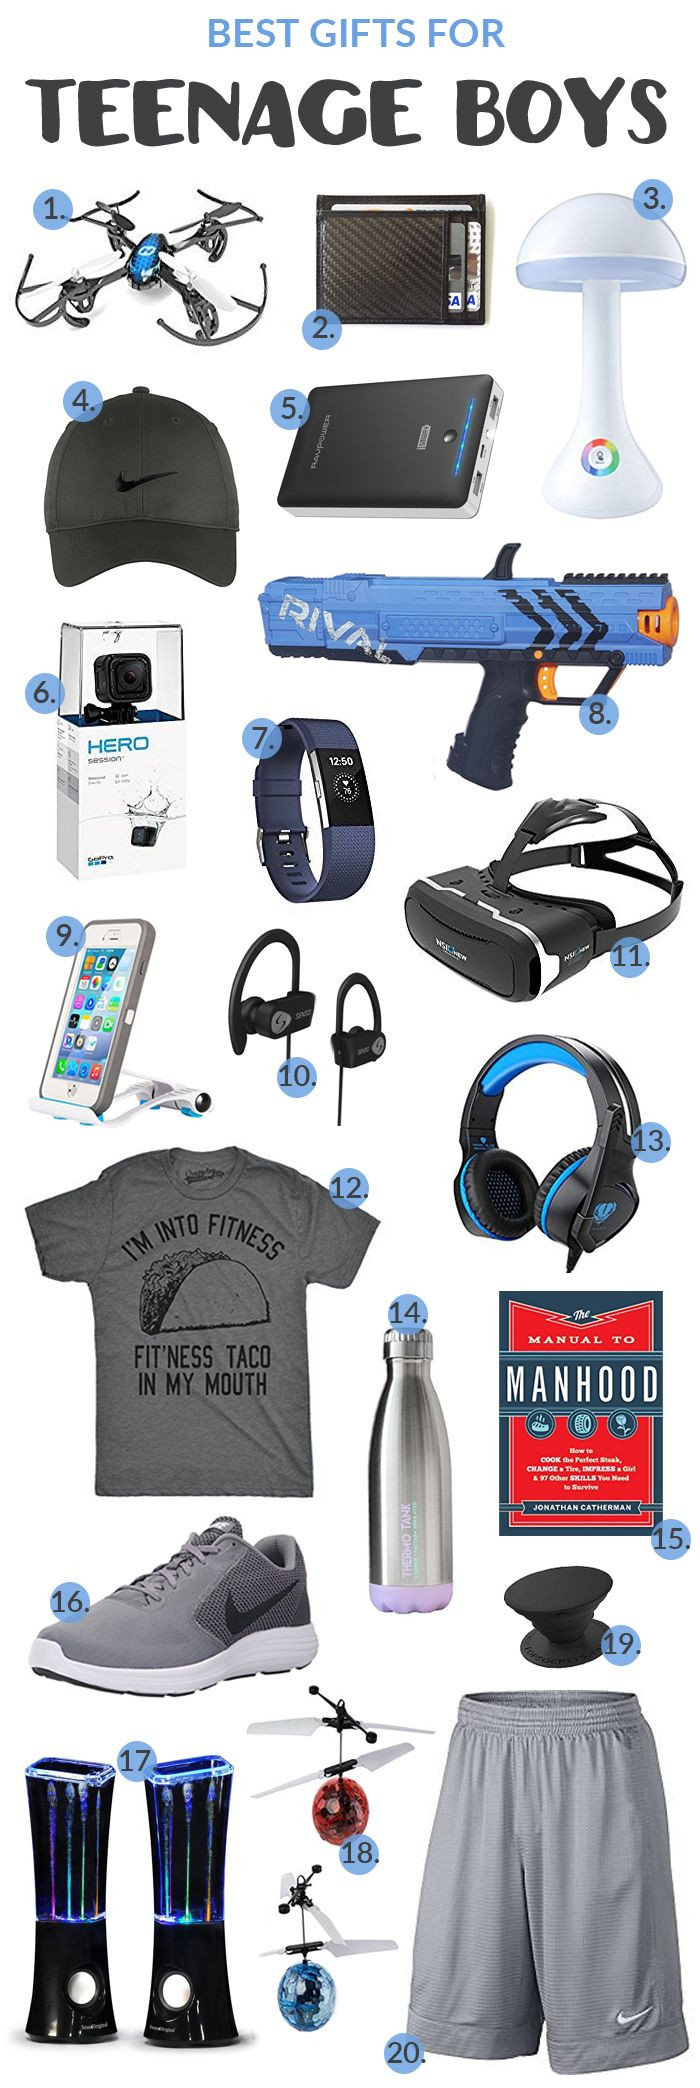 Gift Ideas For Teenager Boys
 Pin on Our Kind of Crazy Best of Board